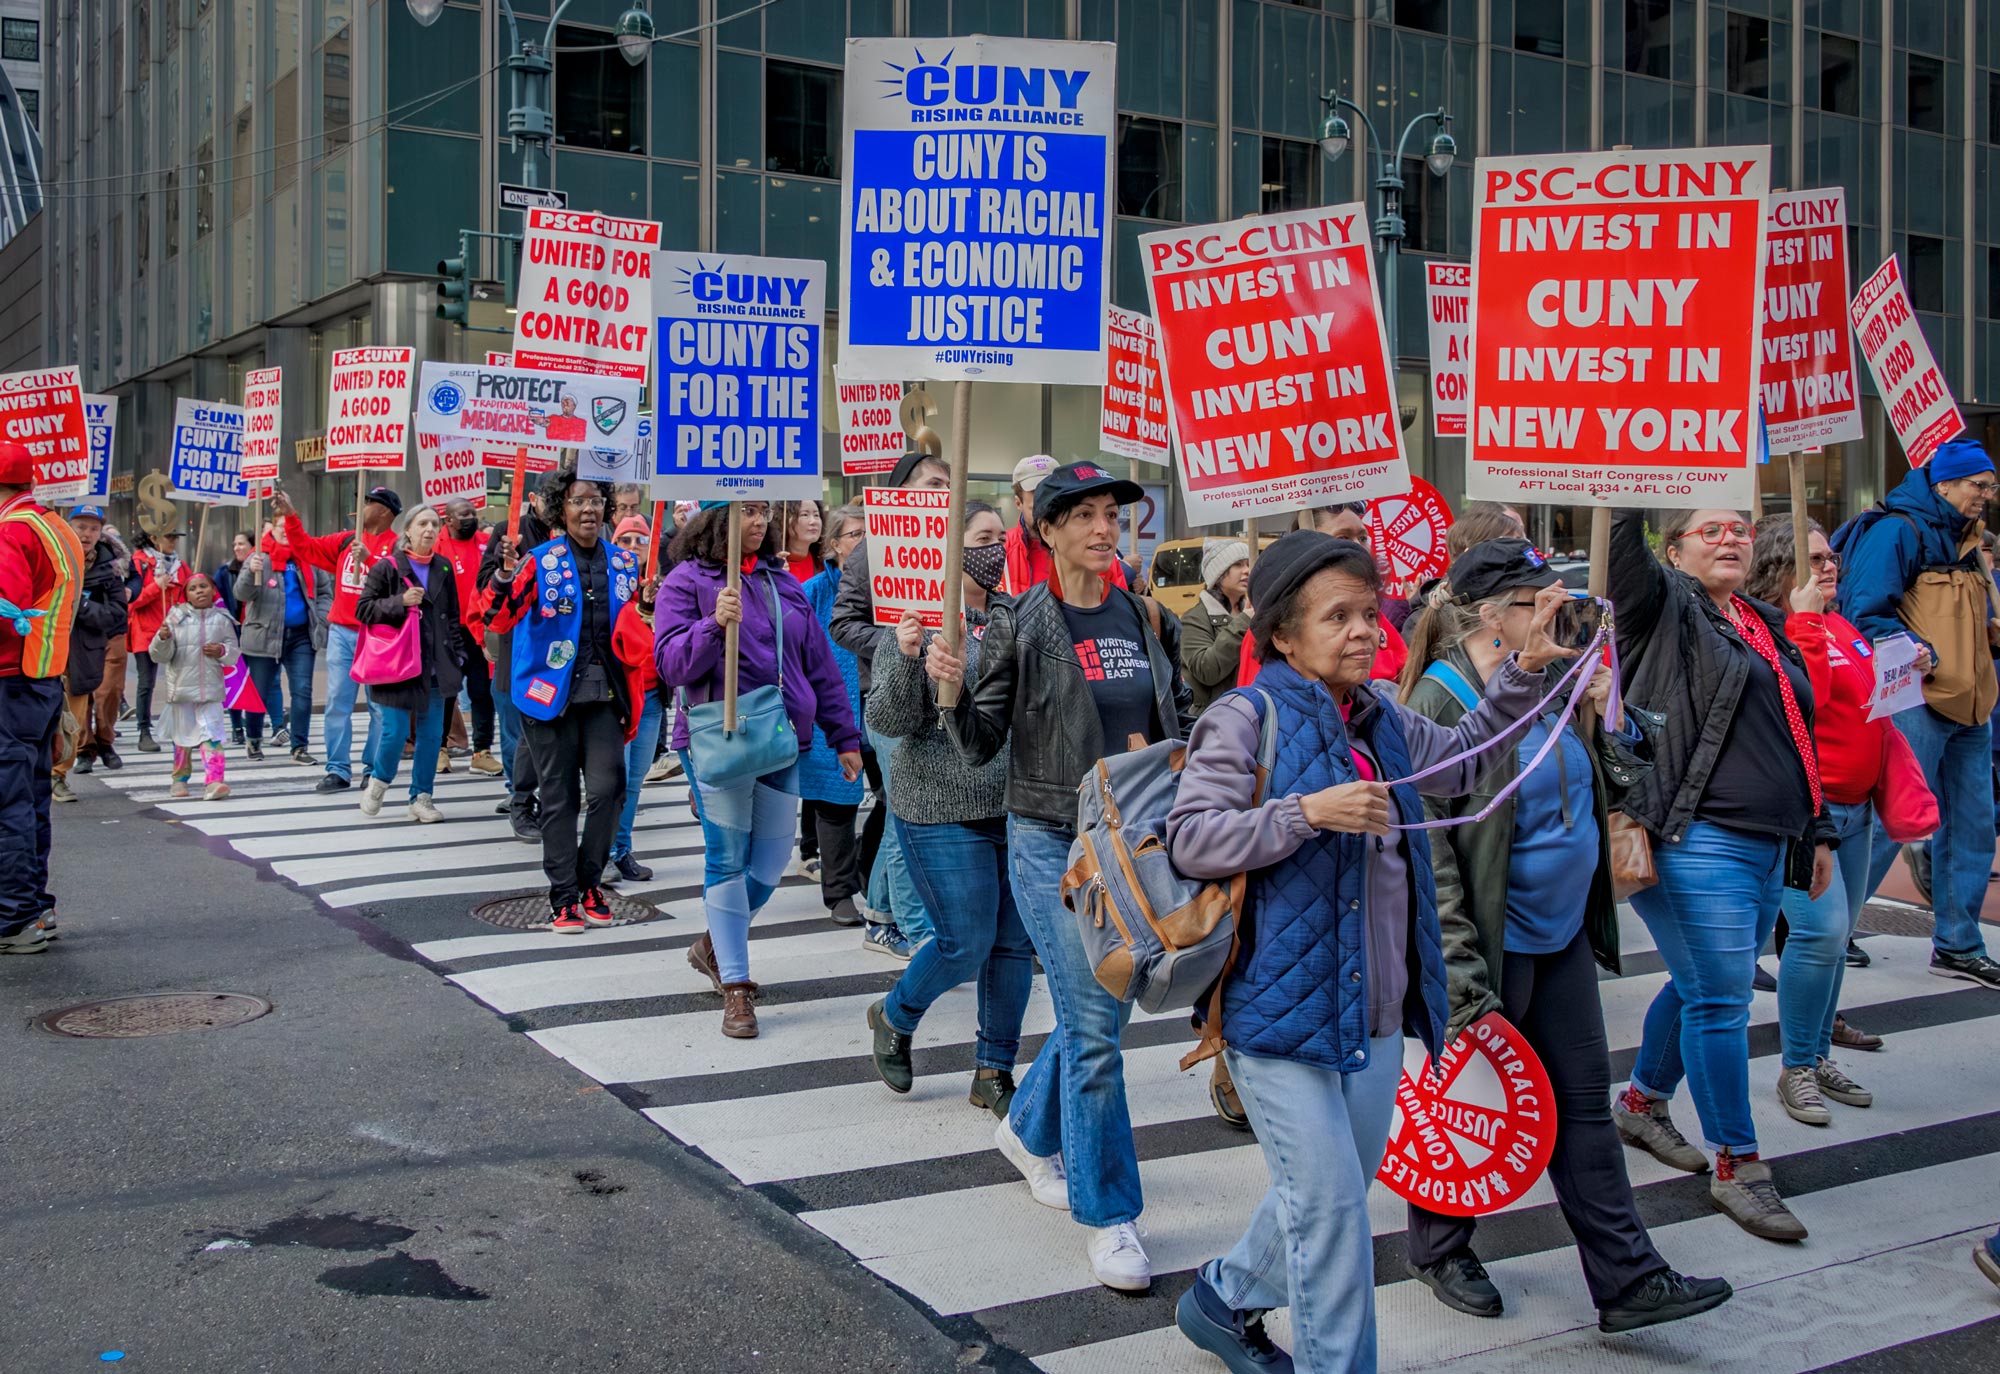 Members marching to CUNY headquarters, to demand a contract with CUNY that lifts pay for faculty and staff and for part-timers and full-timers. (Credit: Erik McGregor)